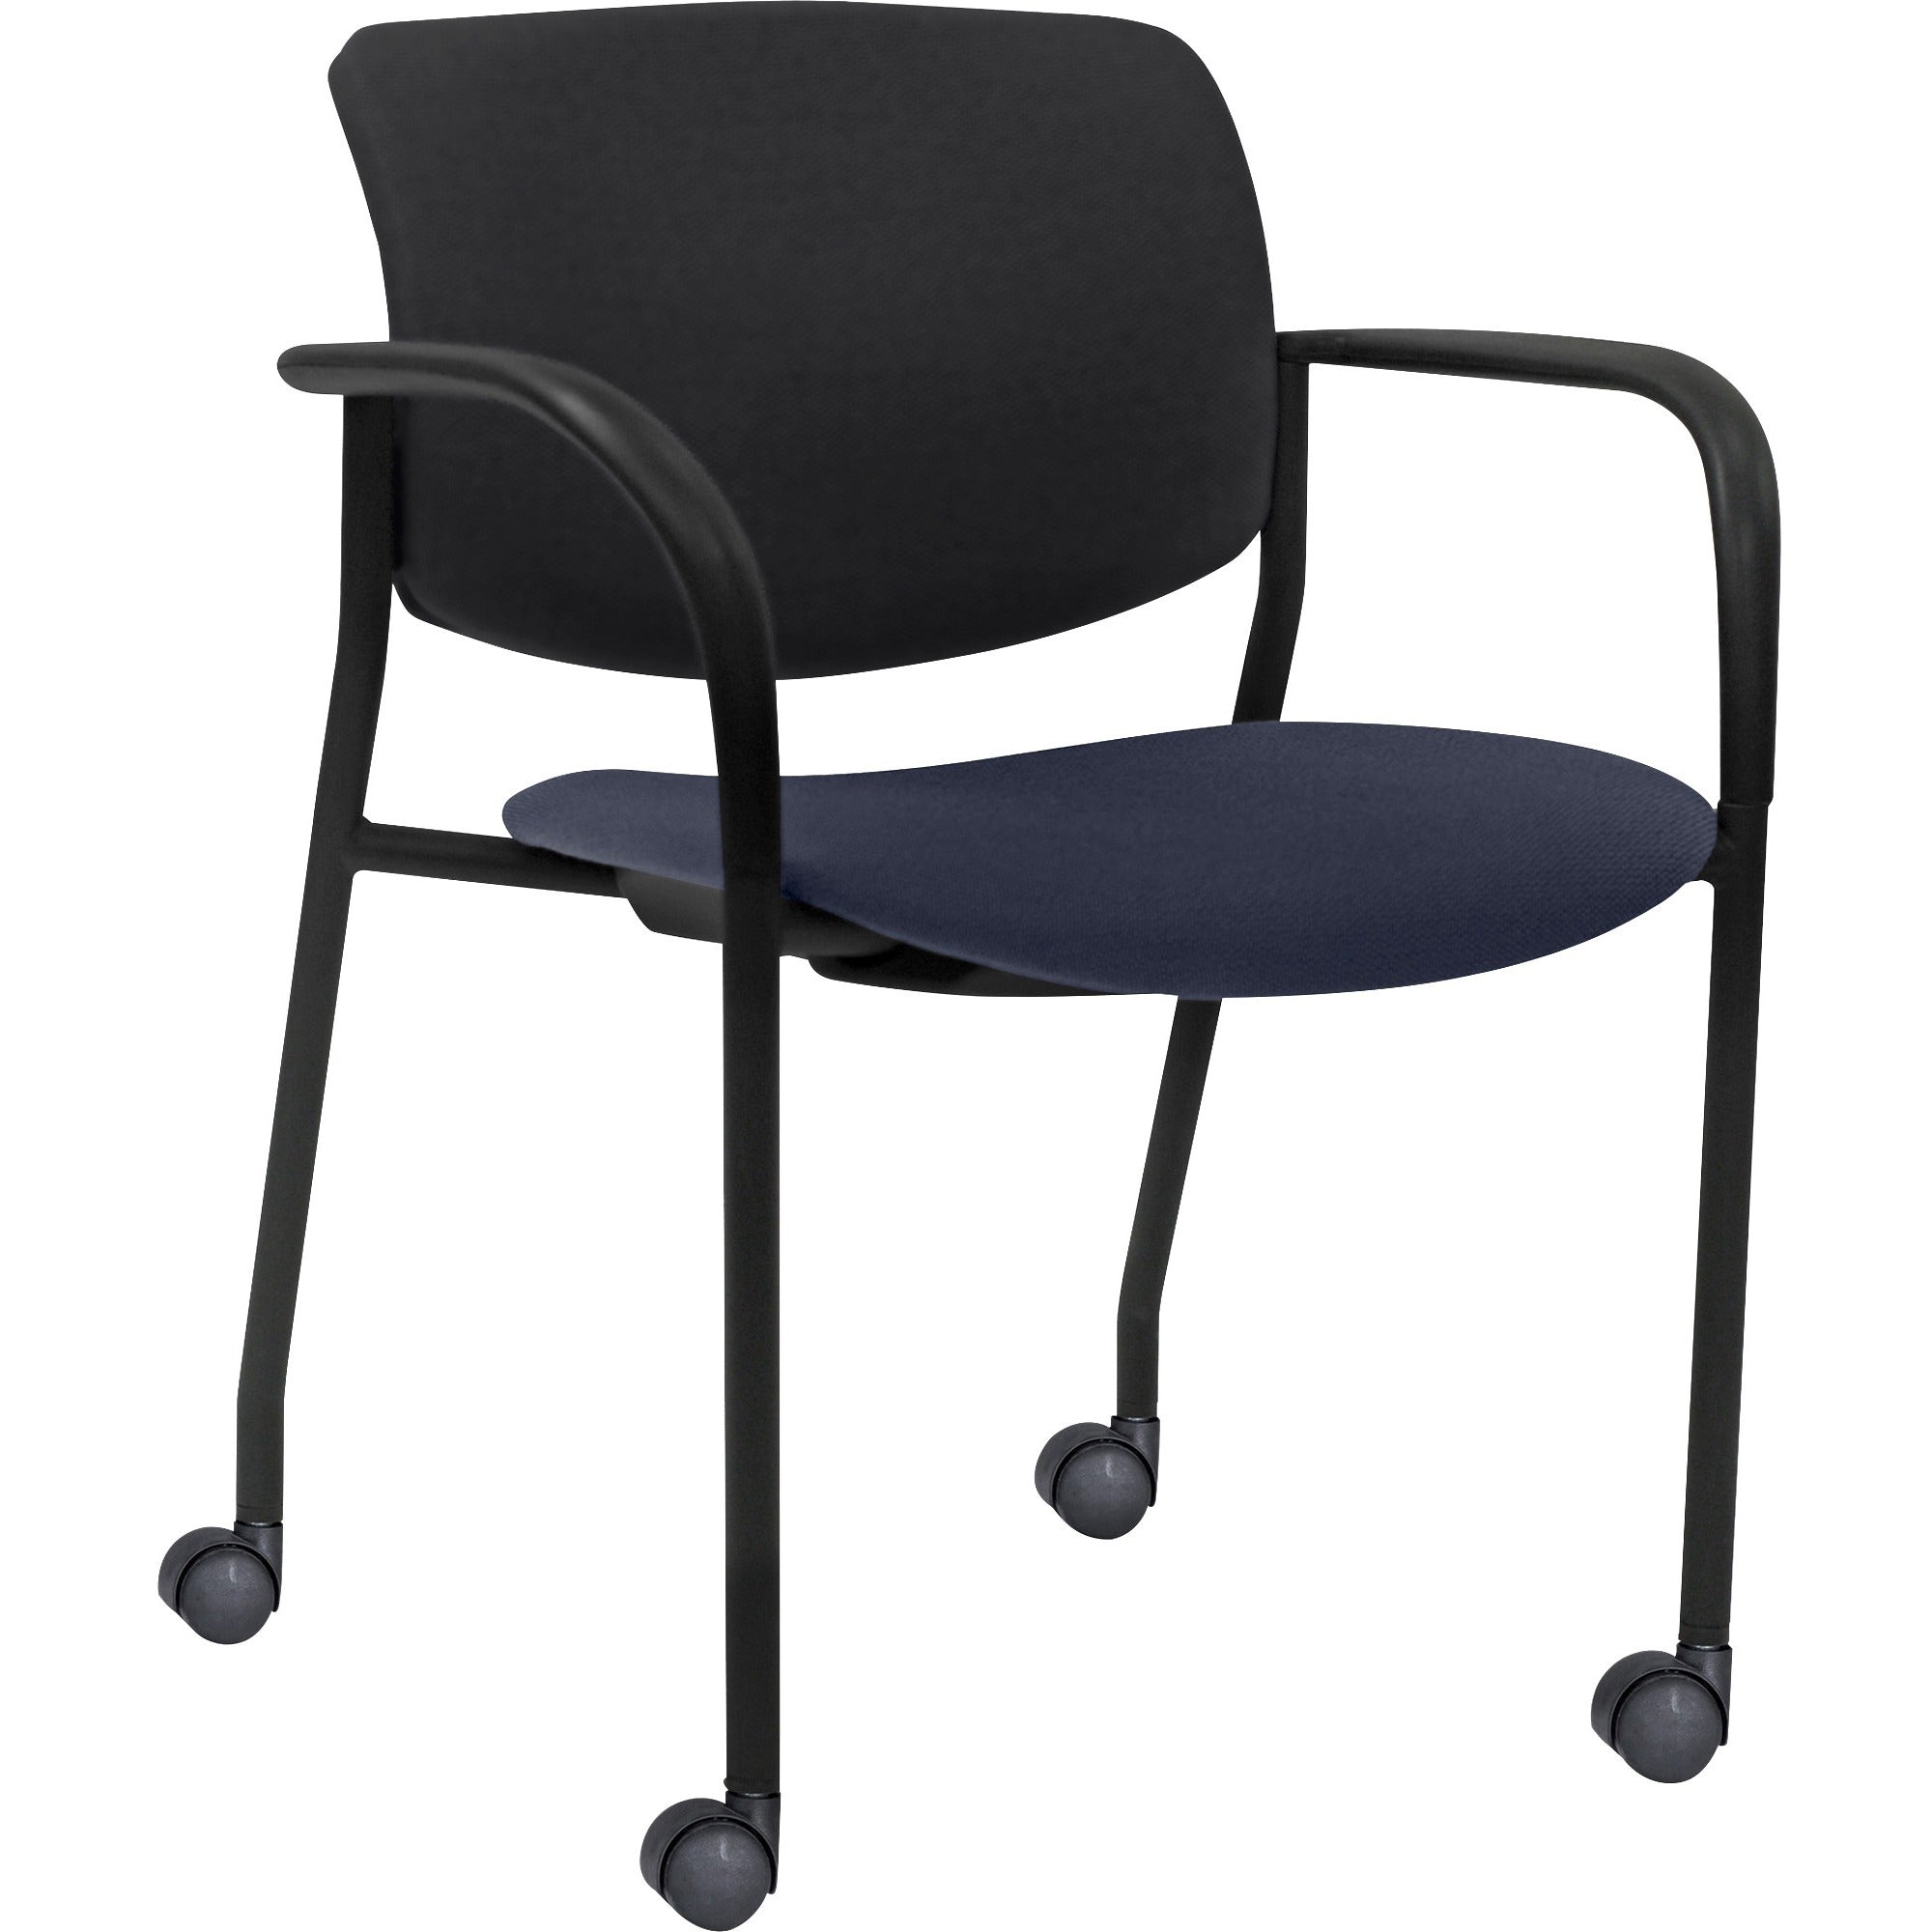 lorell-advent-mobile-stack-chairs-with-arms-dark-blue-foam-crepe-fabric-seat-black-plastic-back-powder-coated-black-tubular-steel-frame-four-legged-base-armrest-2-carton_llr83115a204 - 1